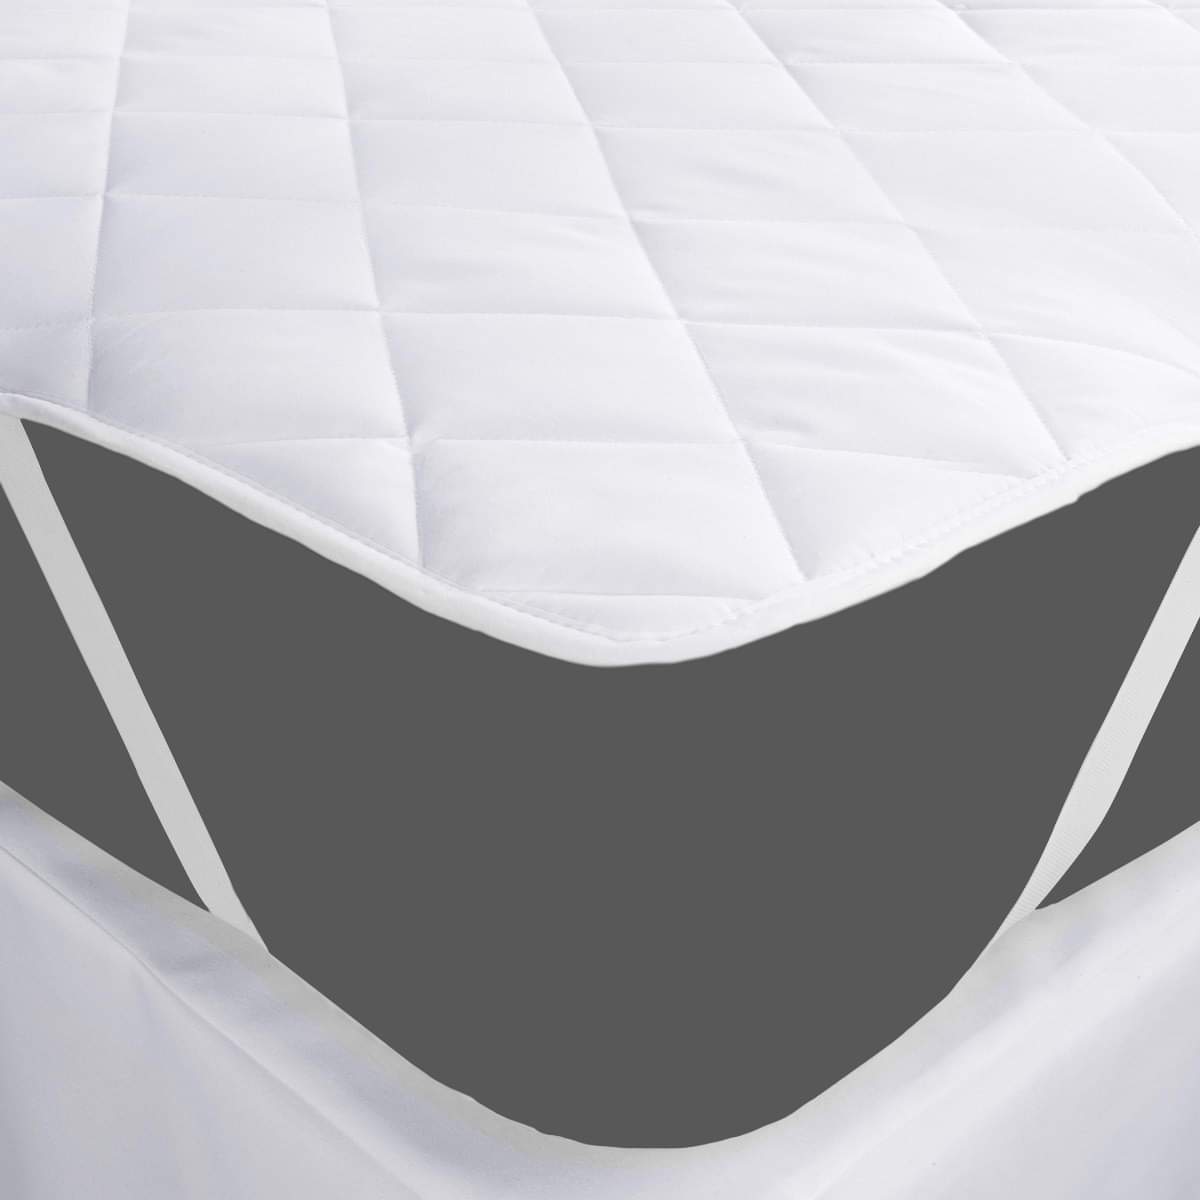 Microfiber Quilted Strapped Mattress Protector